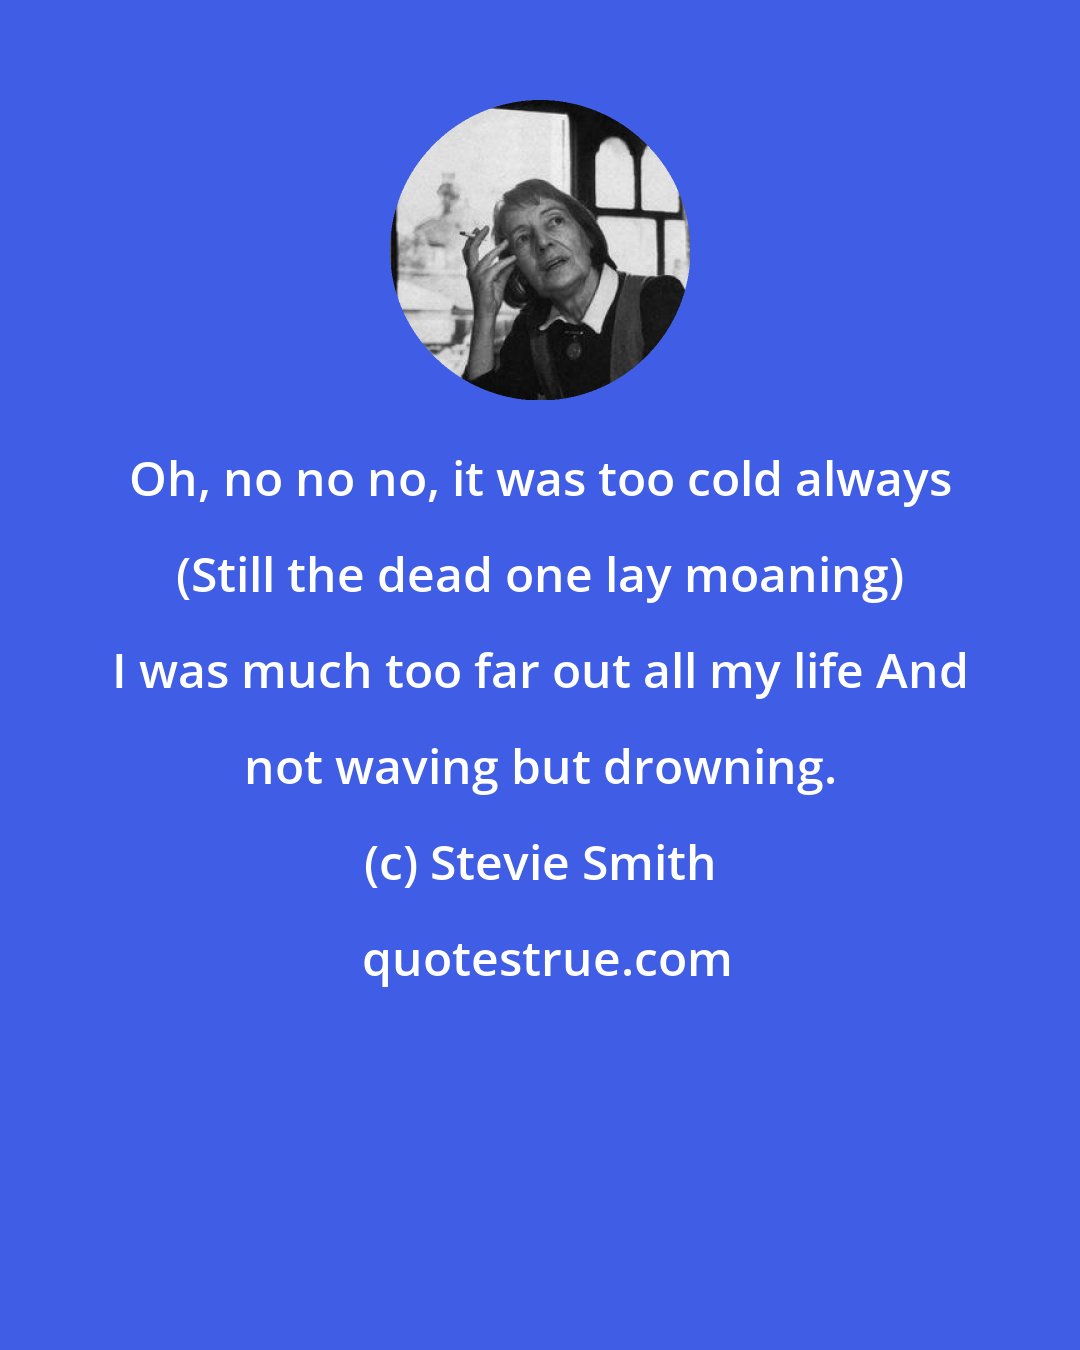 Stevie Smith: Oh, no no no, it was too cold always (Still the dead one lay moaning) I was much too far out all my life And not waving but drowning.